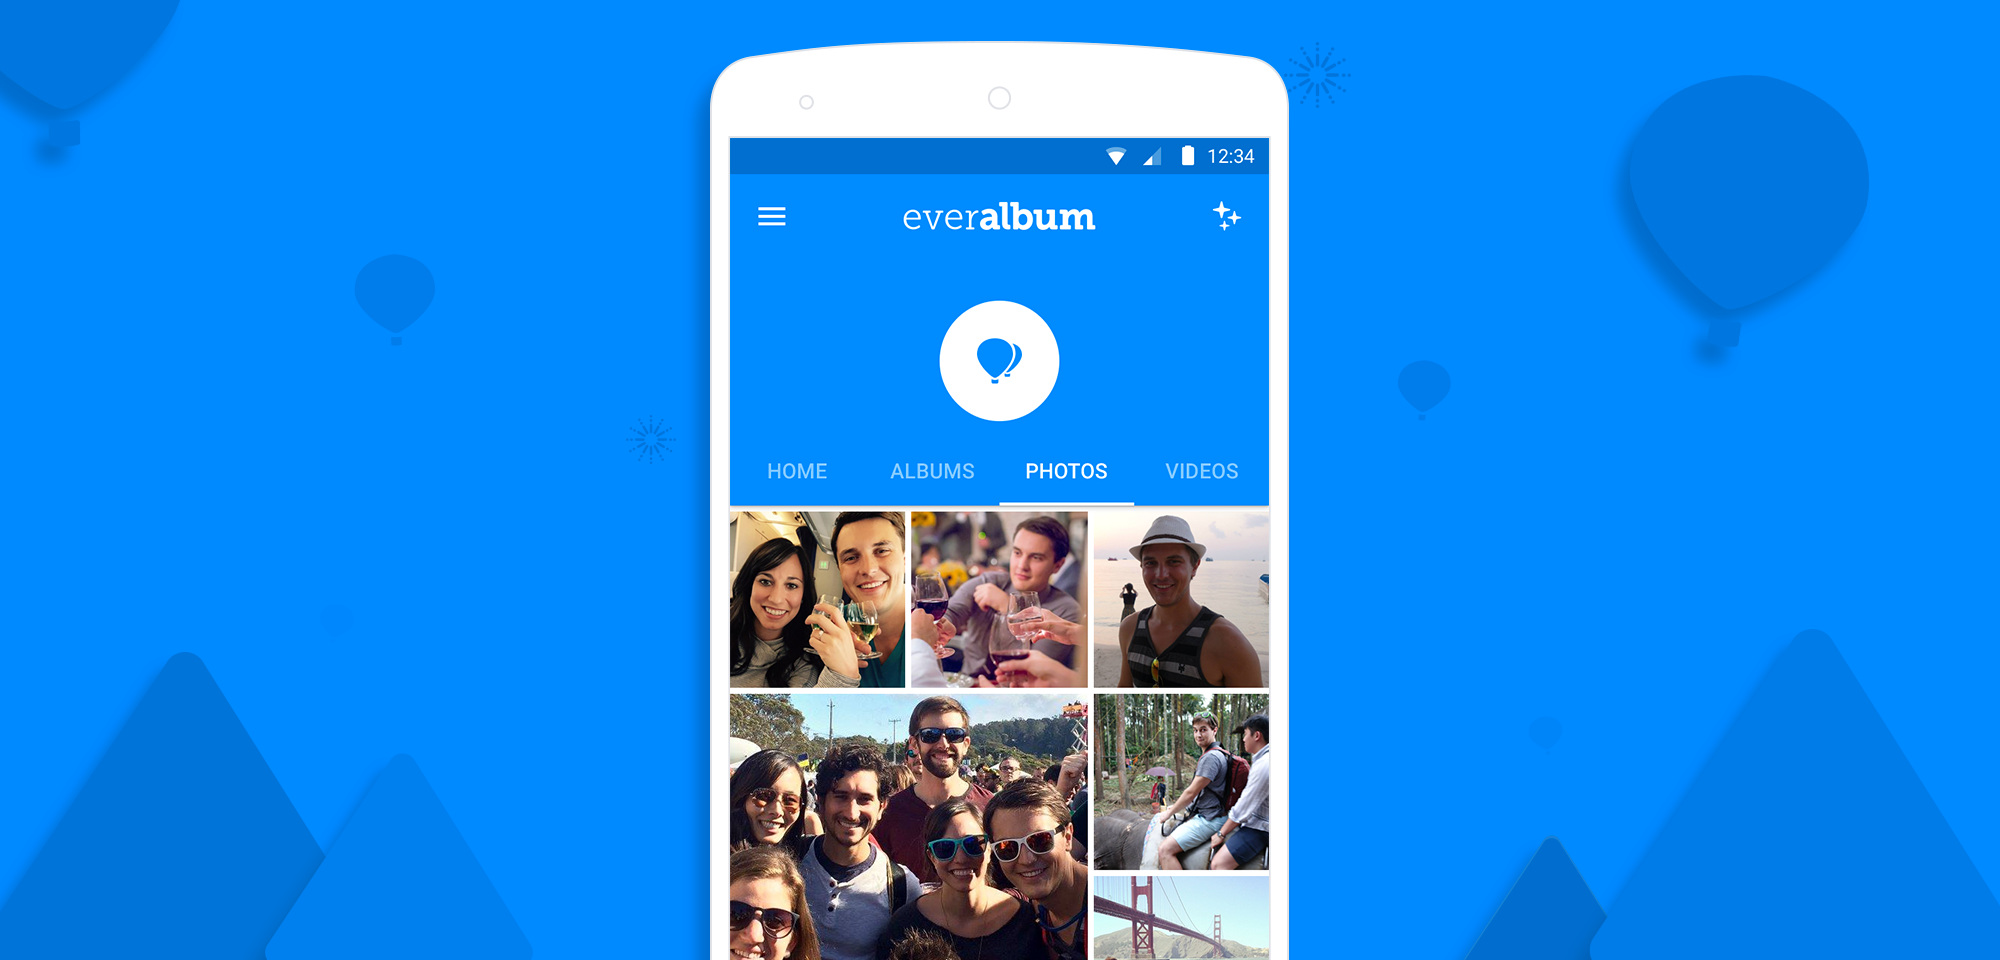 Popular Everalbum photo app is now available for Android